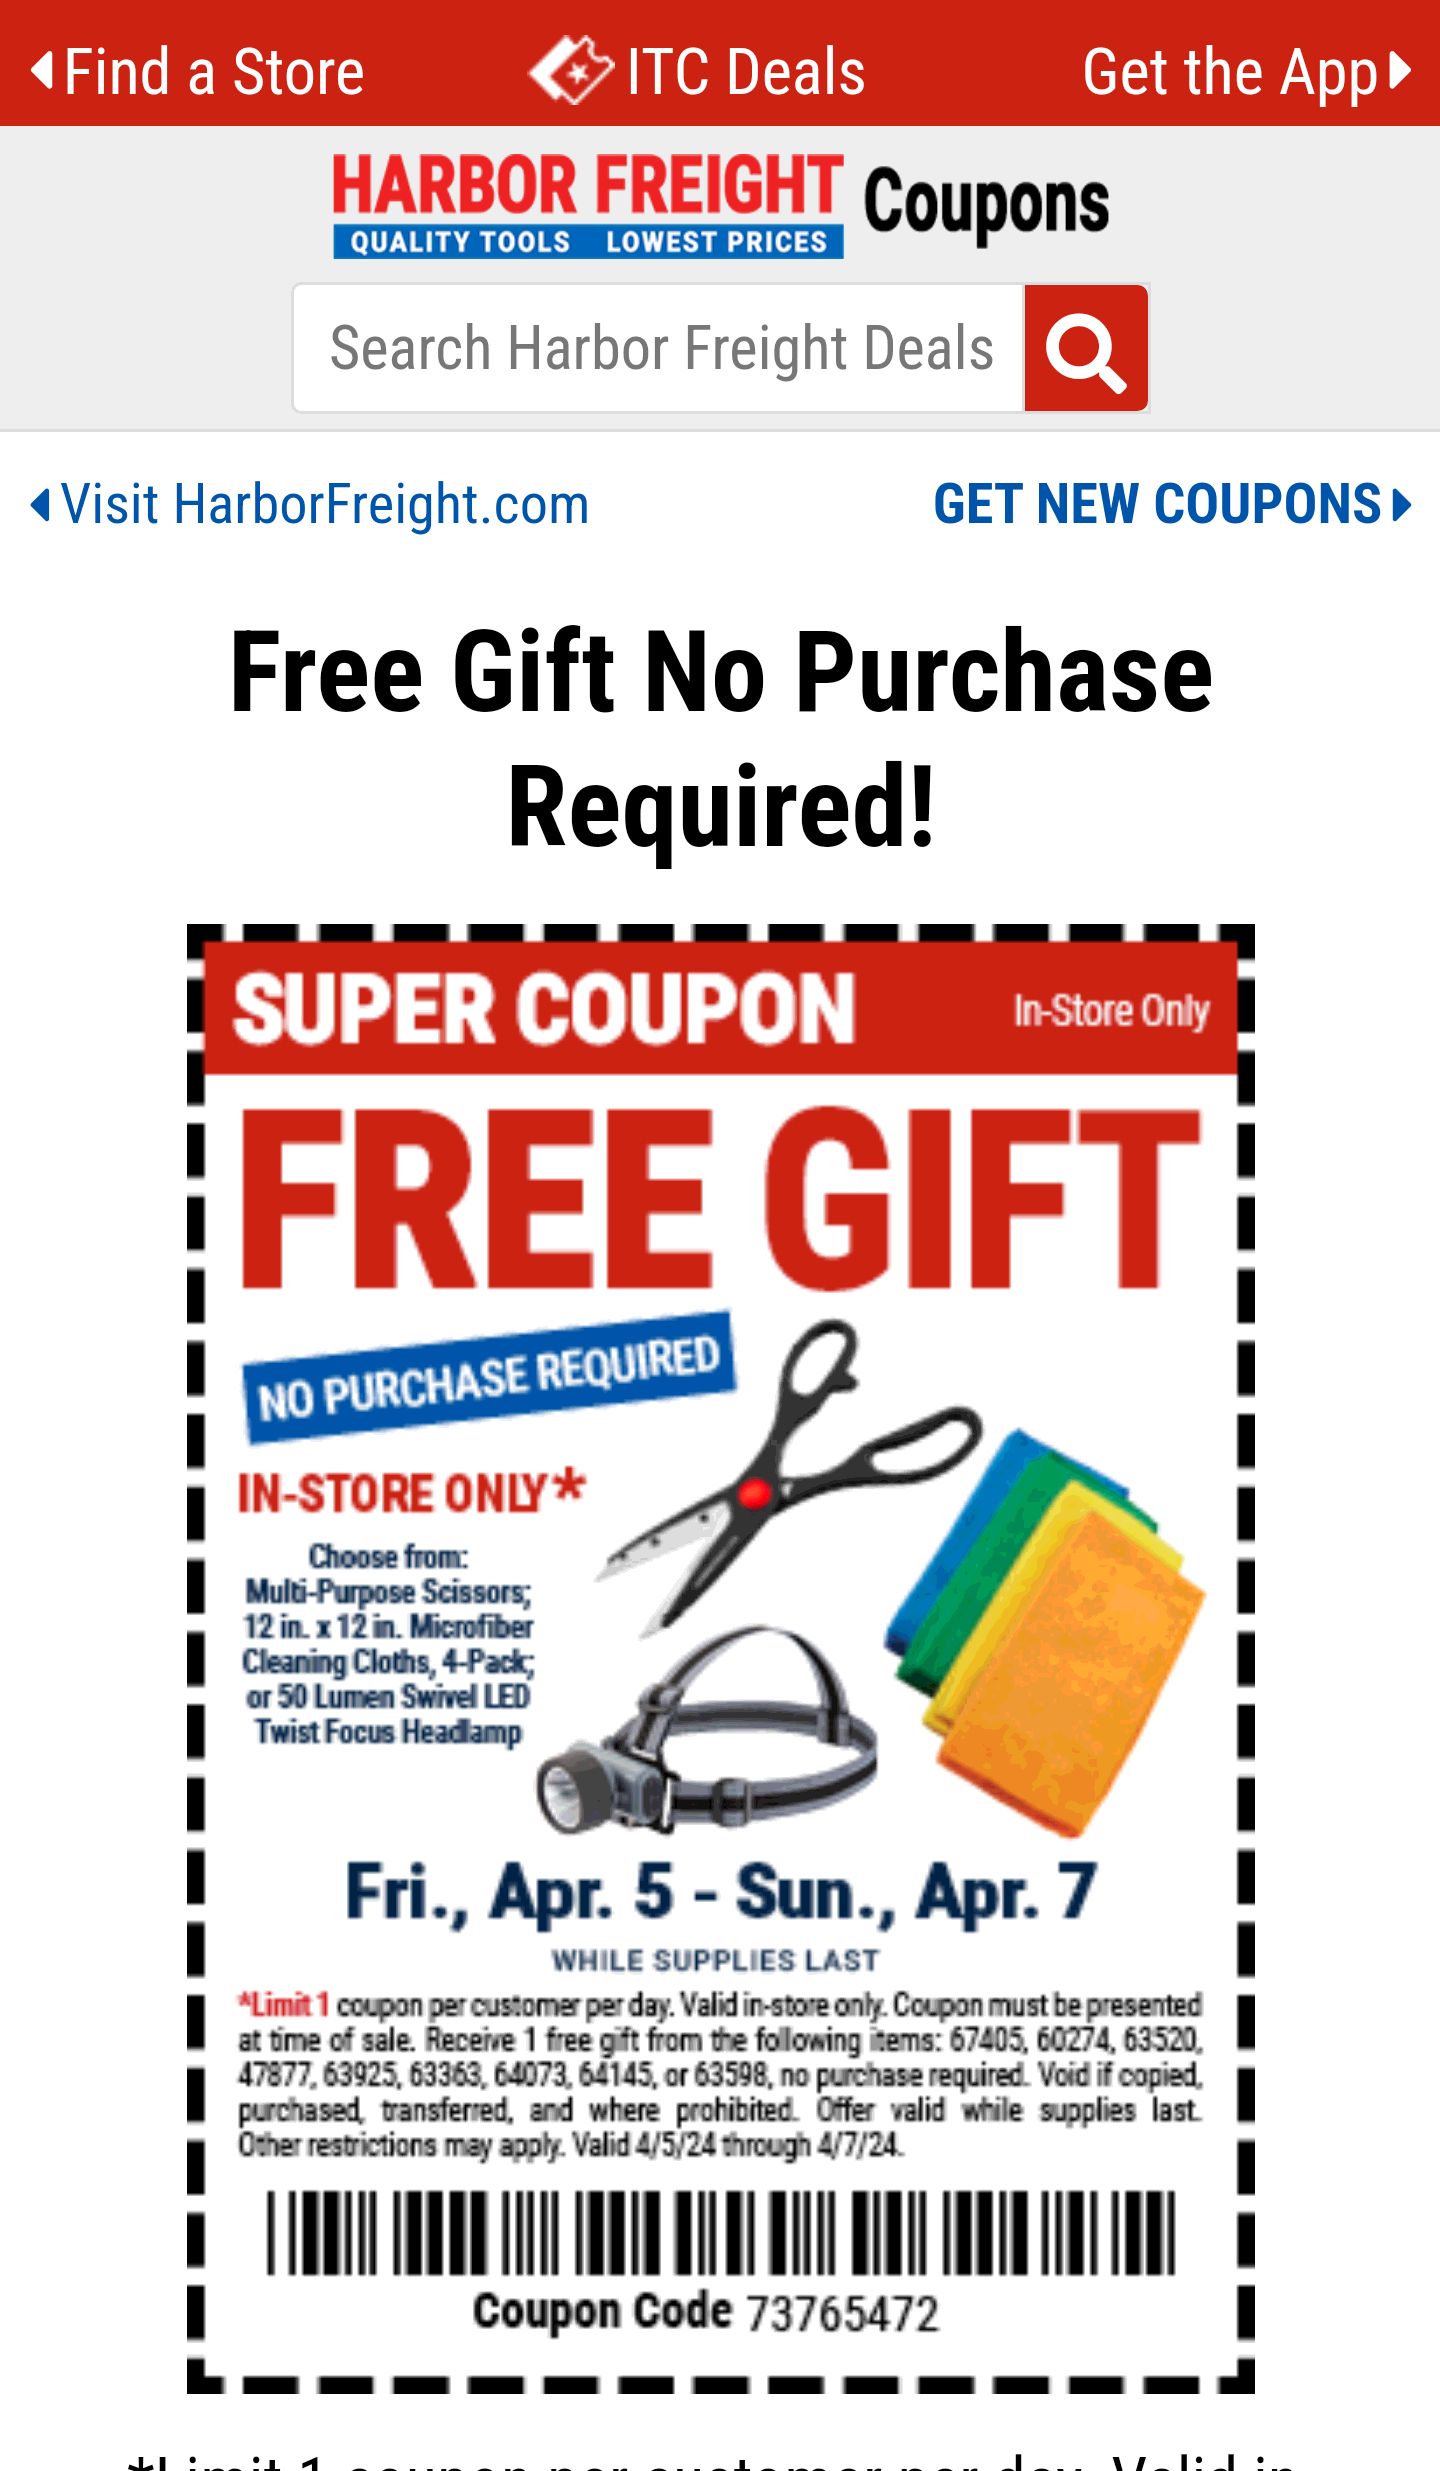 Free Gift No Purchase Required! – Harbor Freight Coupons